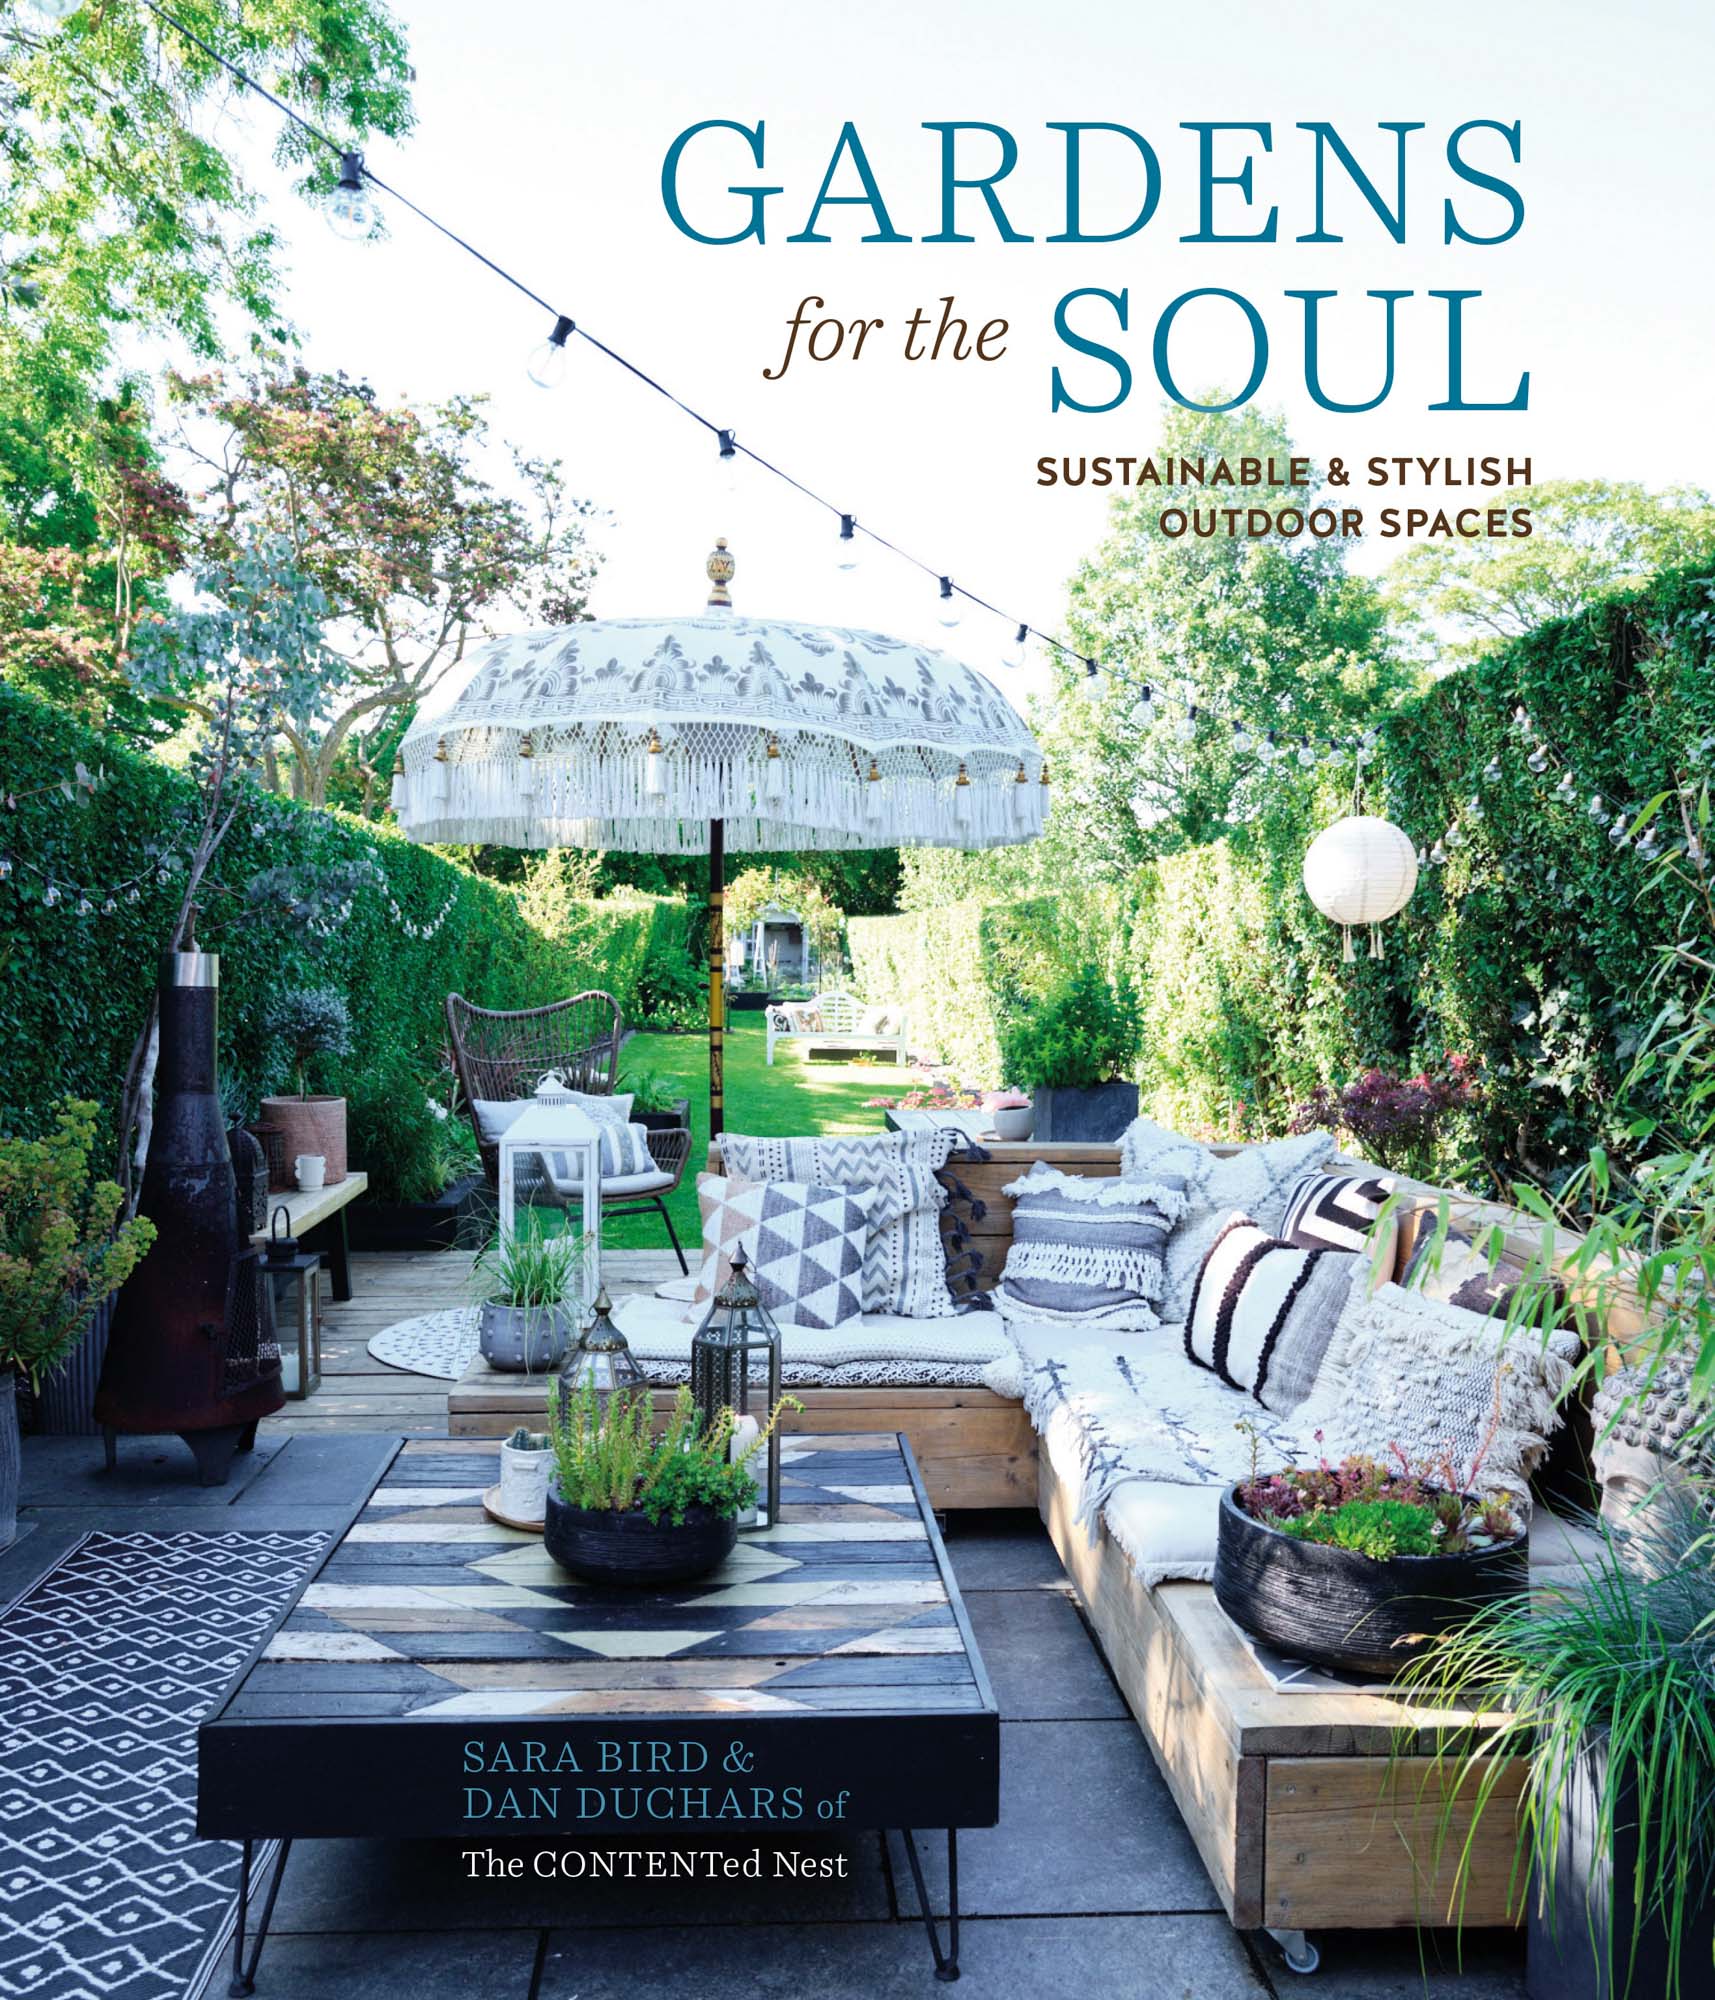 Gardens for the Soul by Sara Bird and Dan Duchars of The Contented Nest (Ryland Peters & Small, distributed by Bookreps, $59.99).